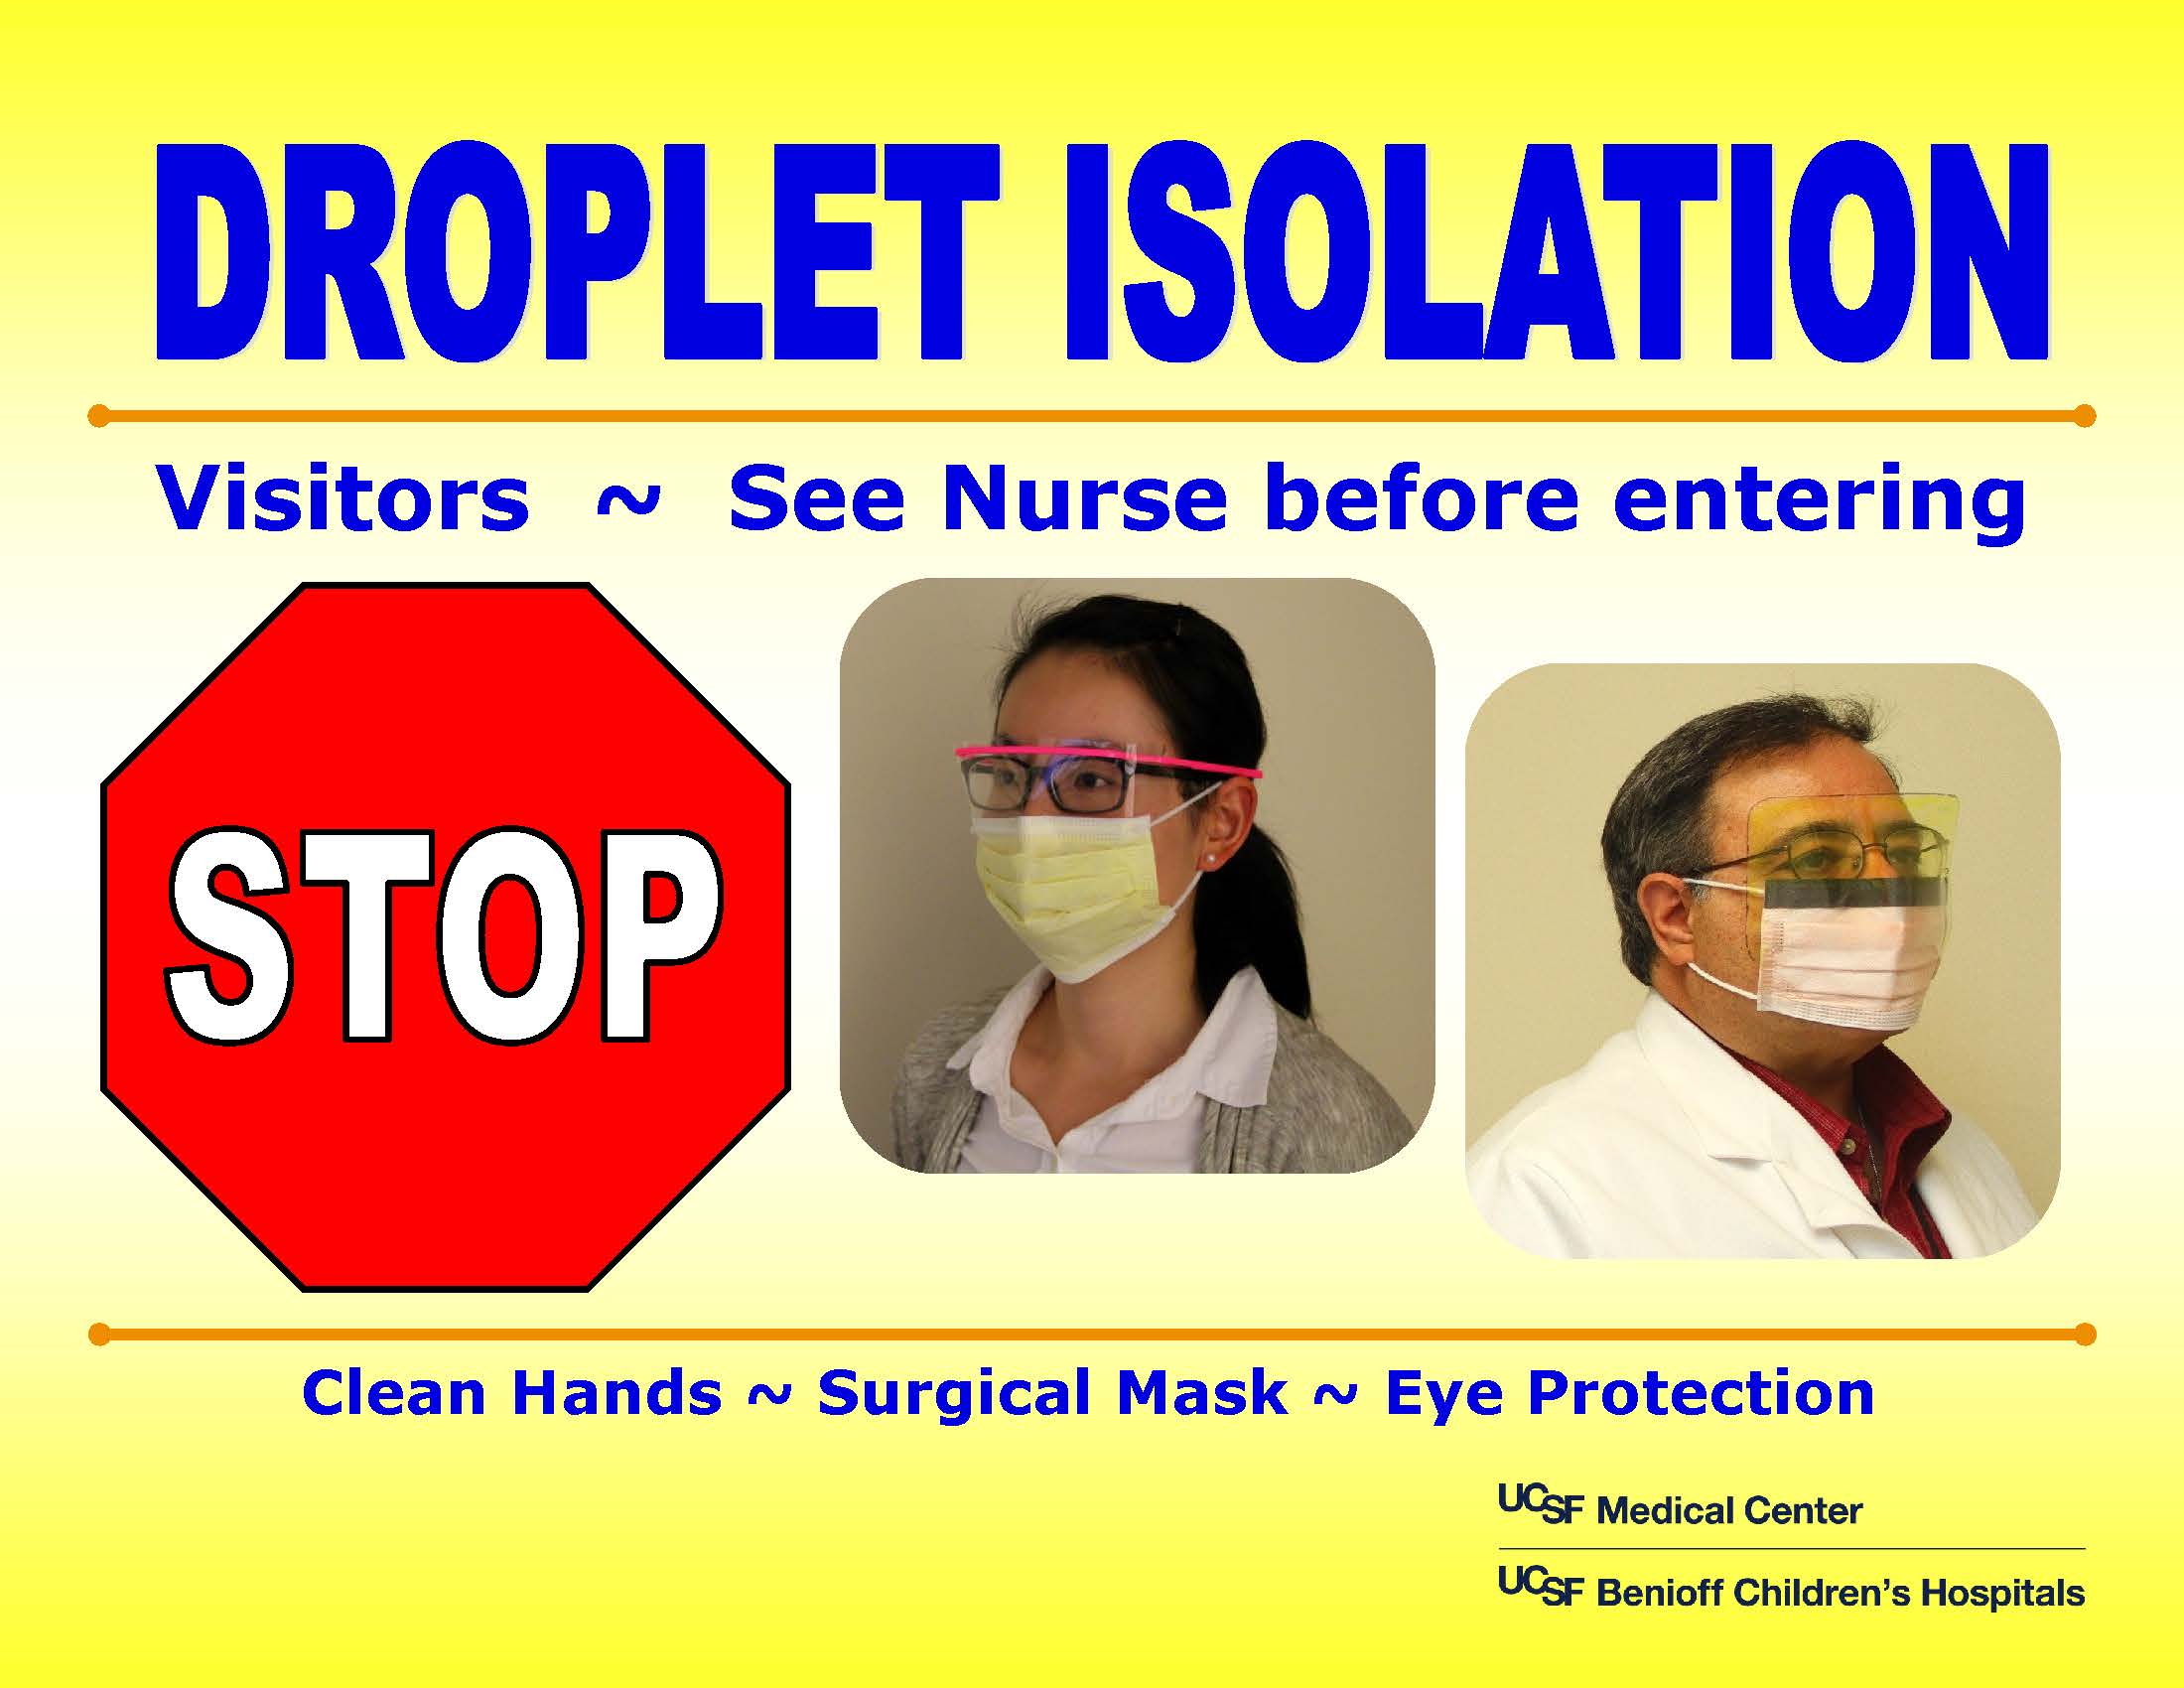 droplet-isolation-sign-ucsf-health-hospital-epidemiology-and-infection-prevention